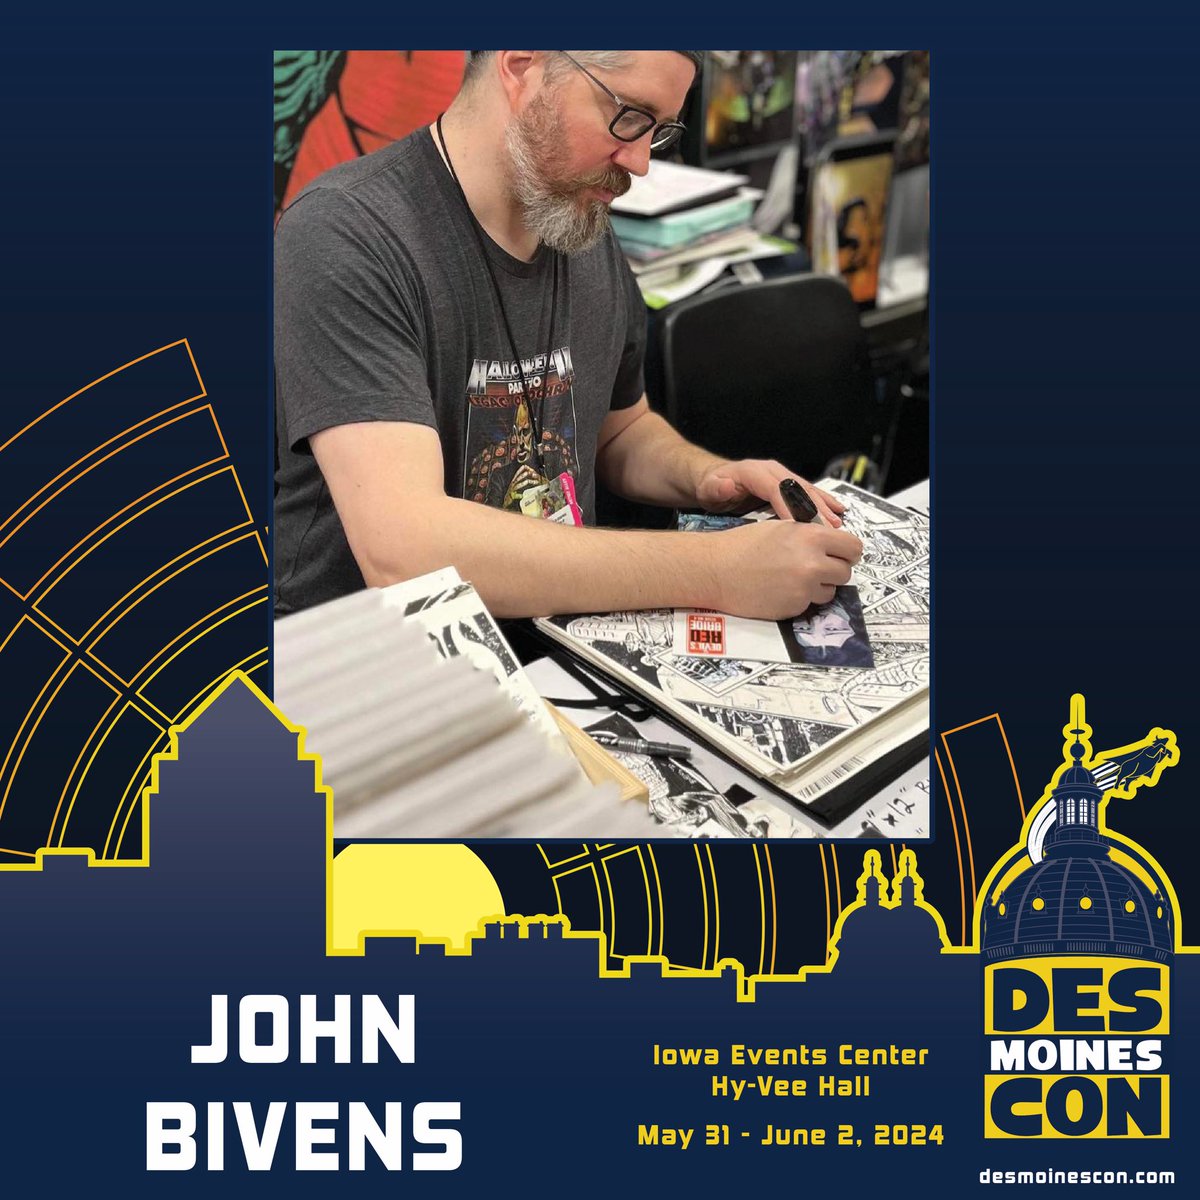 Get ready for comic book creator, core member of World Monster HQ, and educator… John Bivens! ✍️🎉 His work has appeared in Eisner and Harvey award winning titles. He has also been published by Heavy Metal Magazine, Image Comics, Vault Comics, and many others!